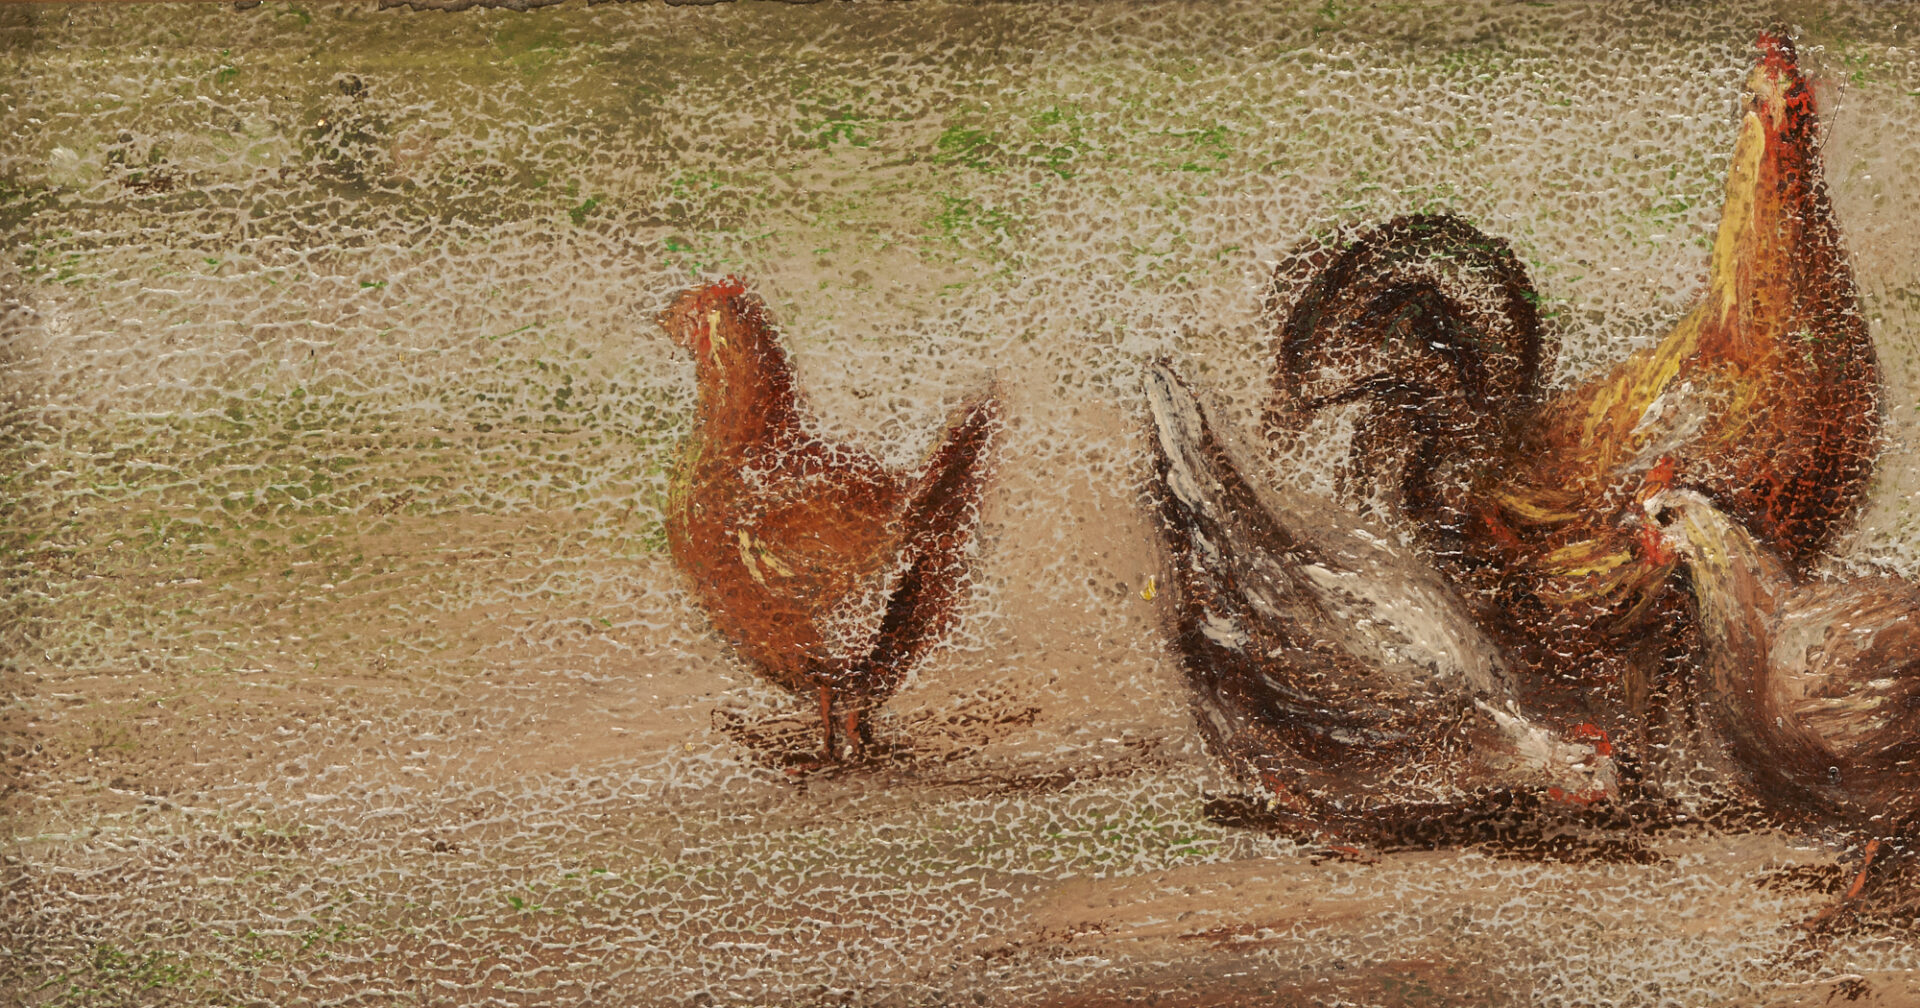 Lot 284: 2 Thomas Campbell O/B Landscapes, Bridge and Chickens